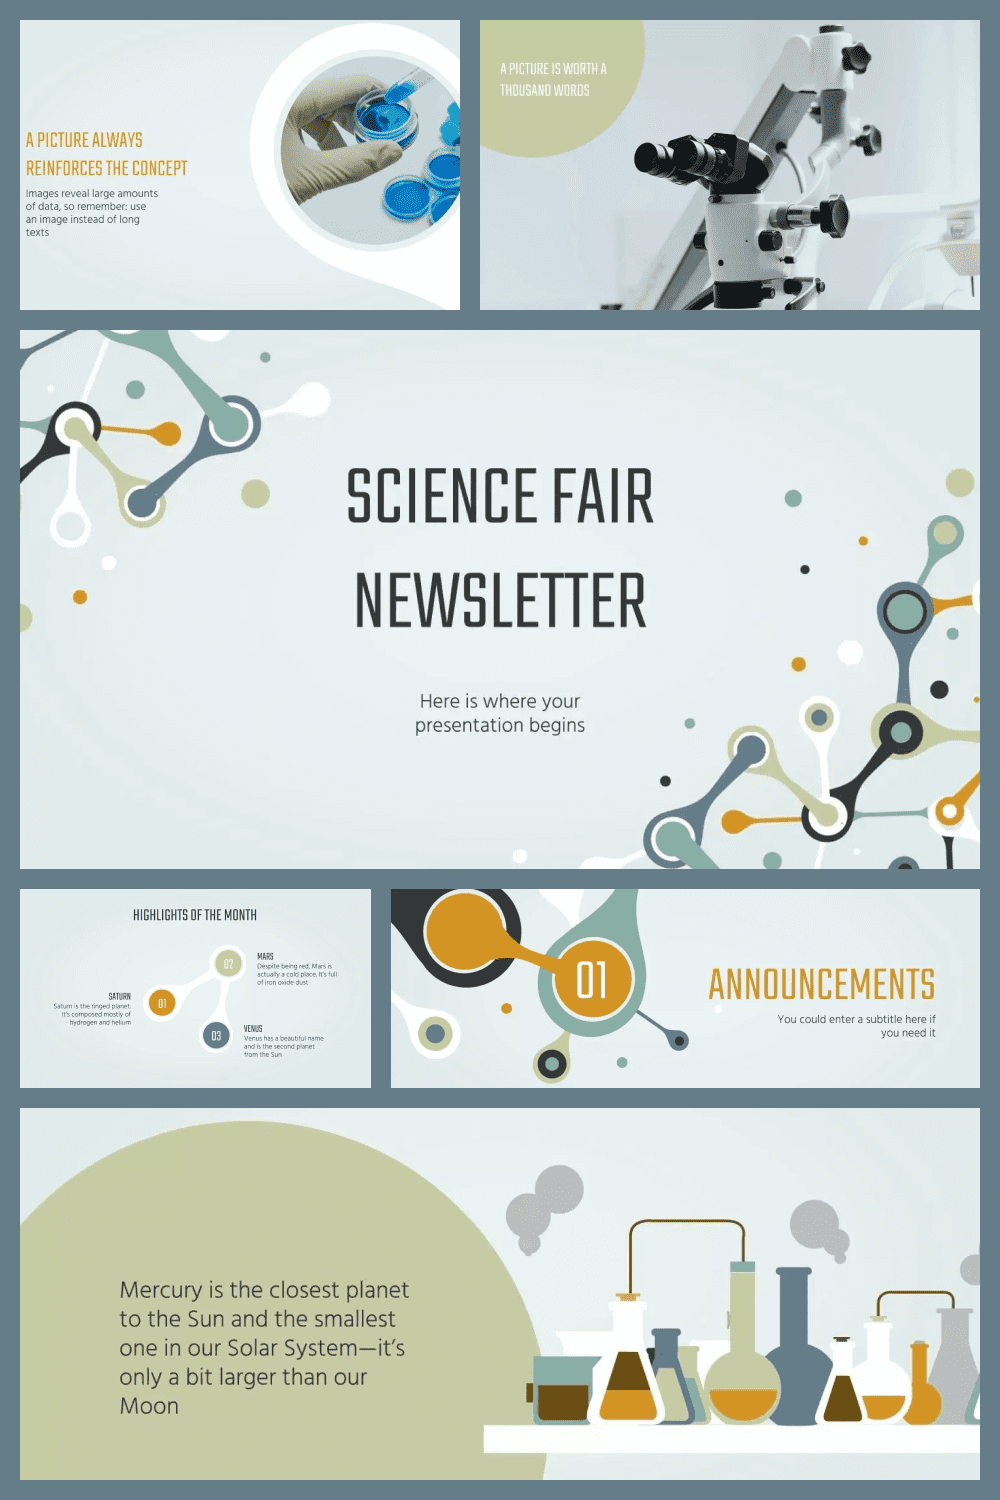 Free Science Fair Newsletter PowerPoint Template.